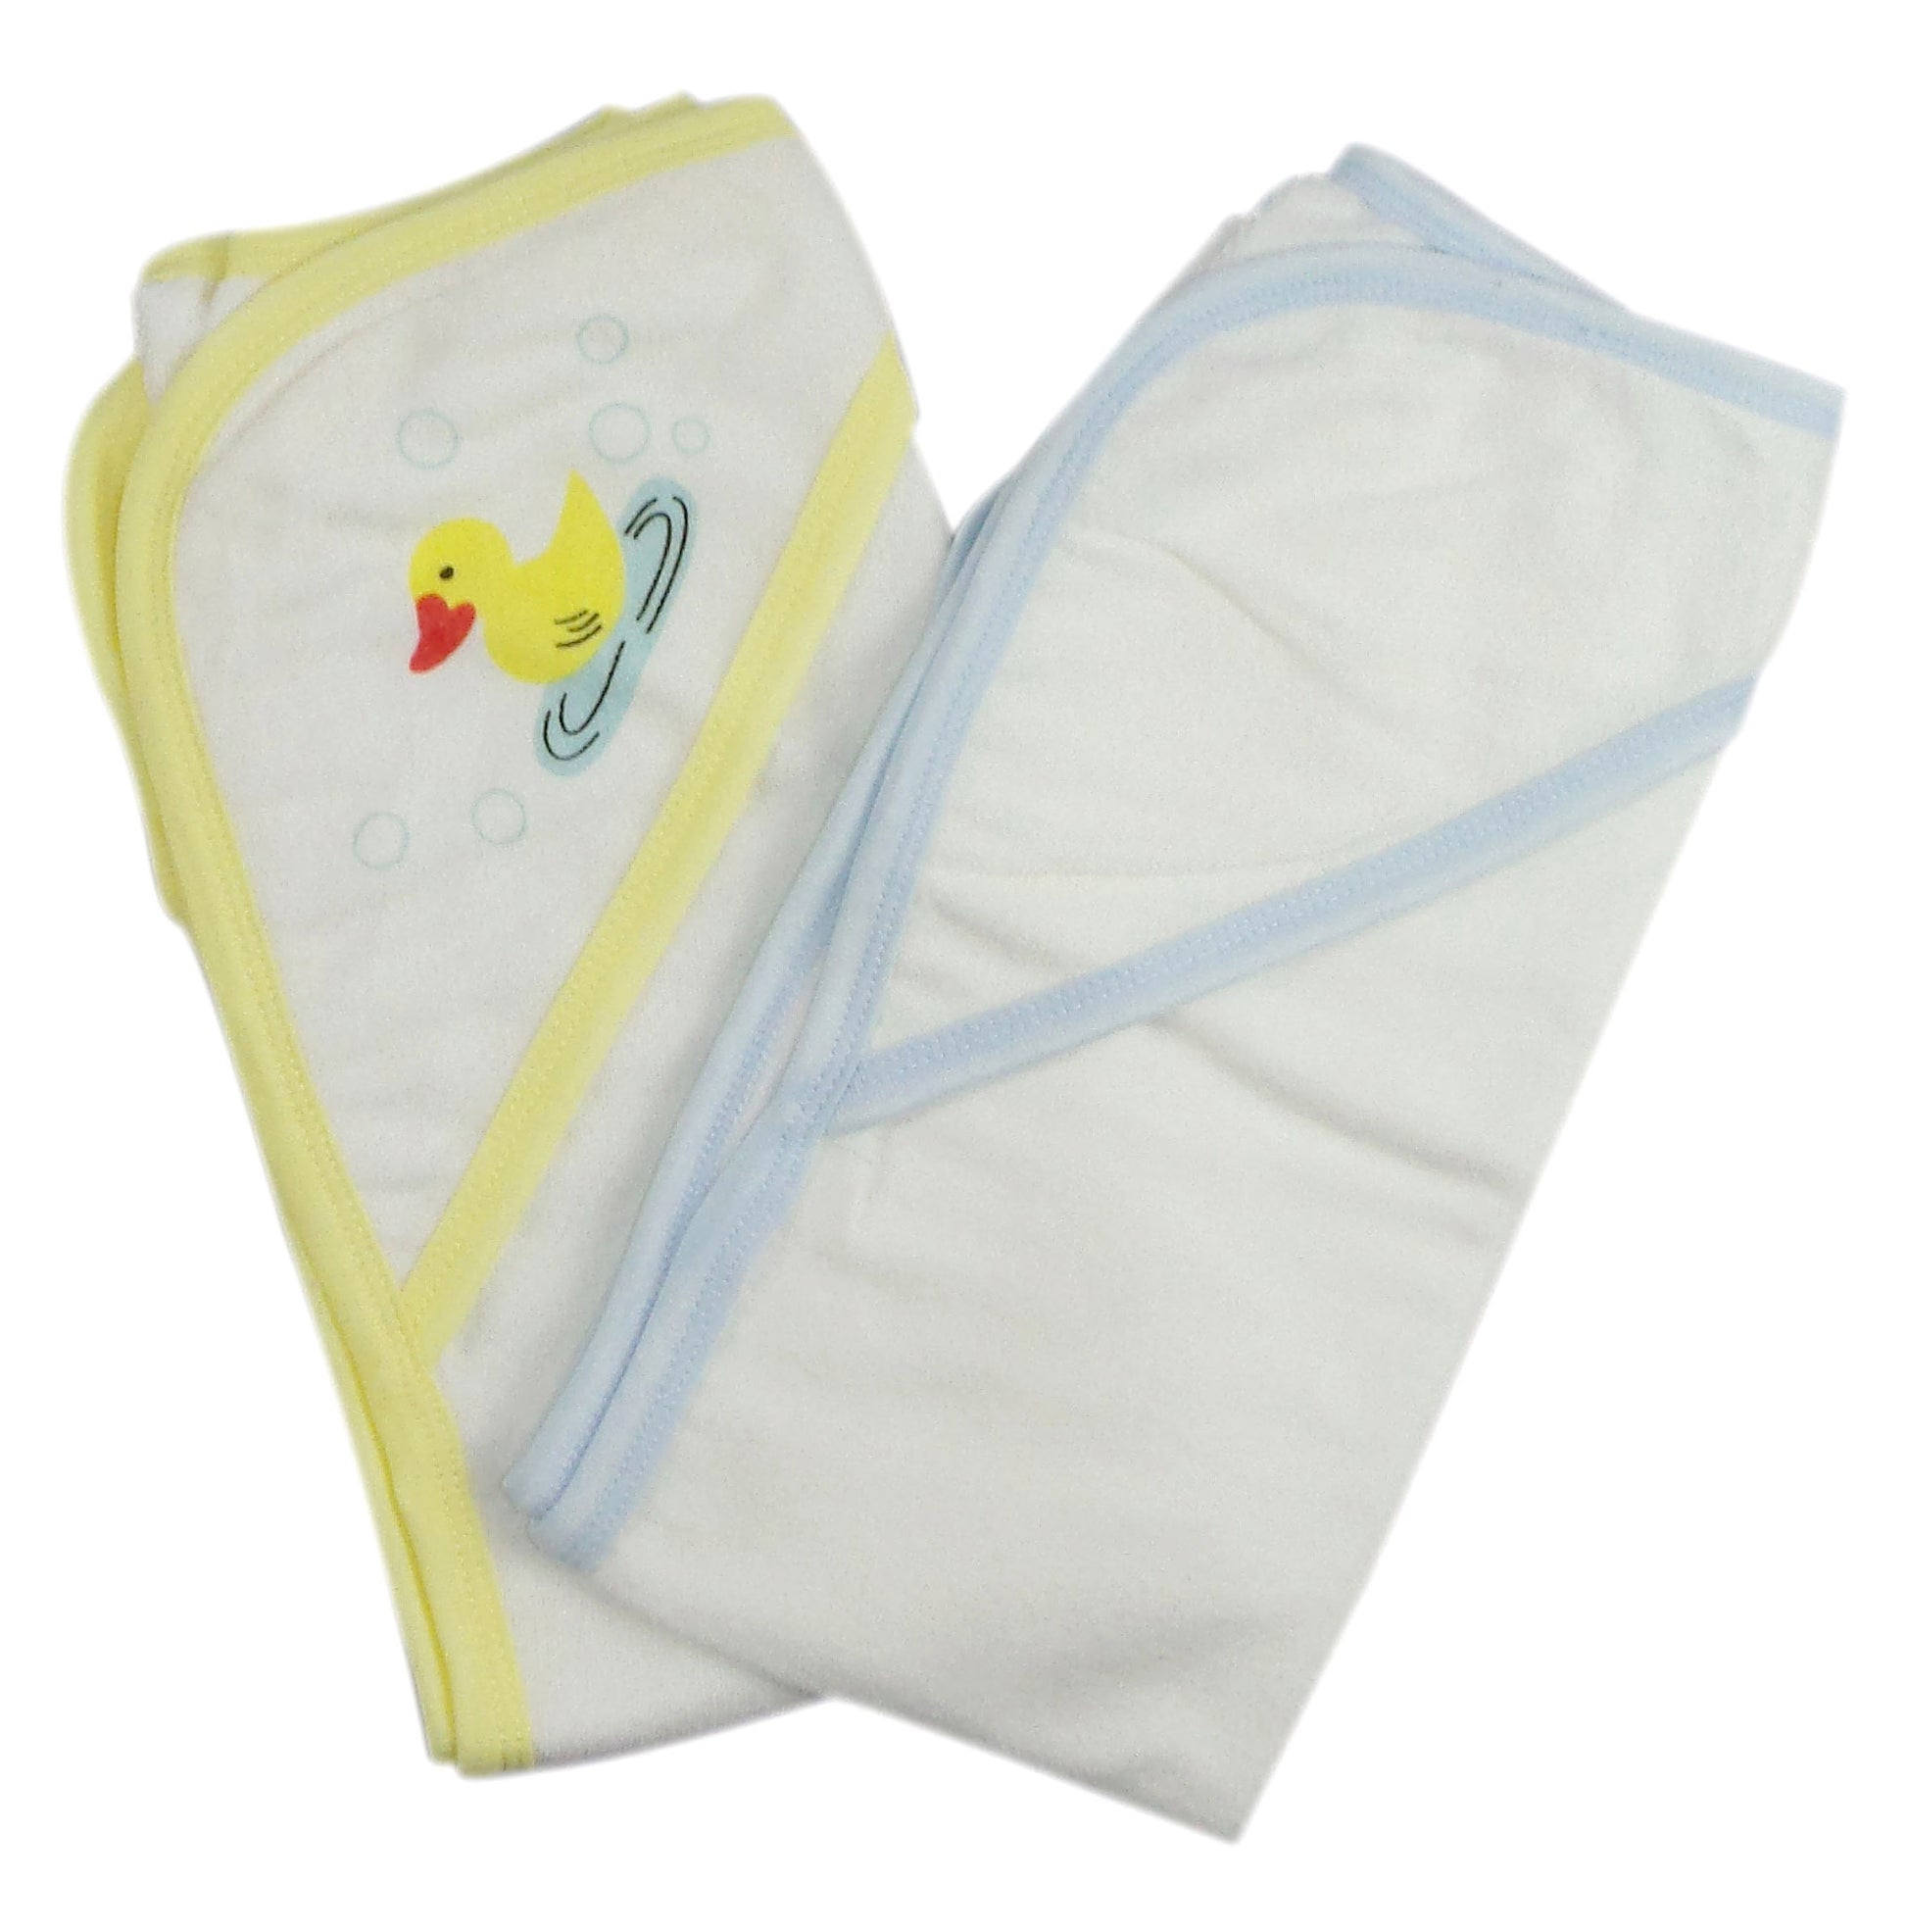 Infant Hooded Bath Towel (Pack of 2) 021-Blue-021B-Yellow